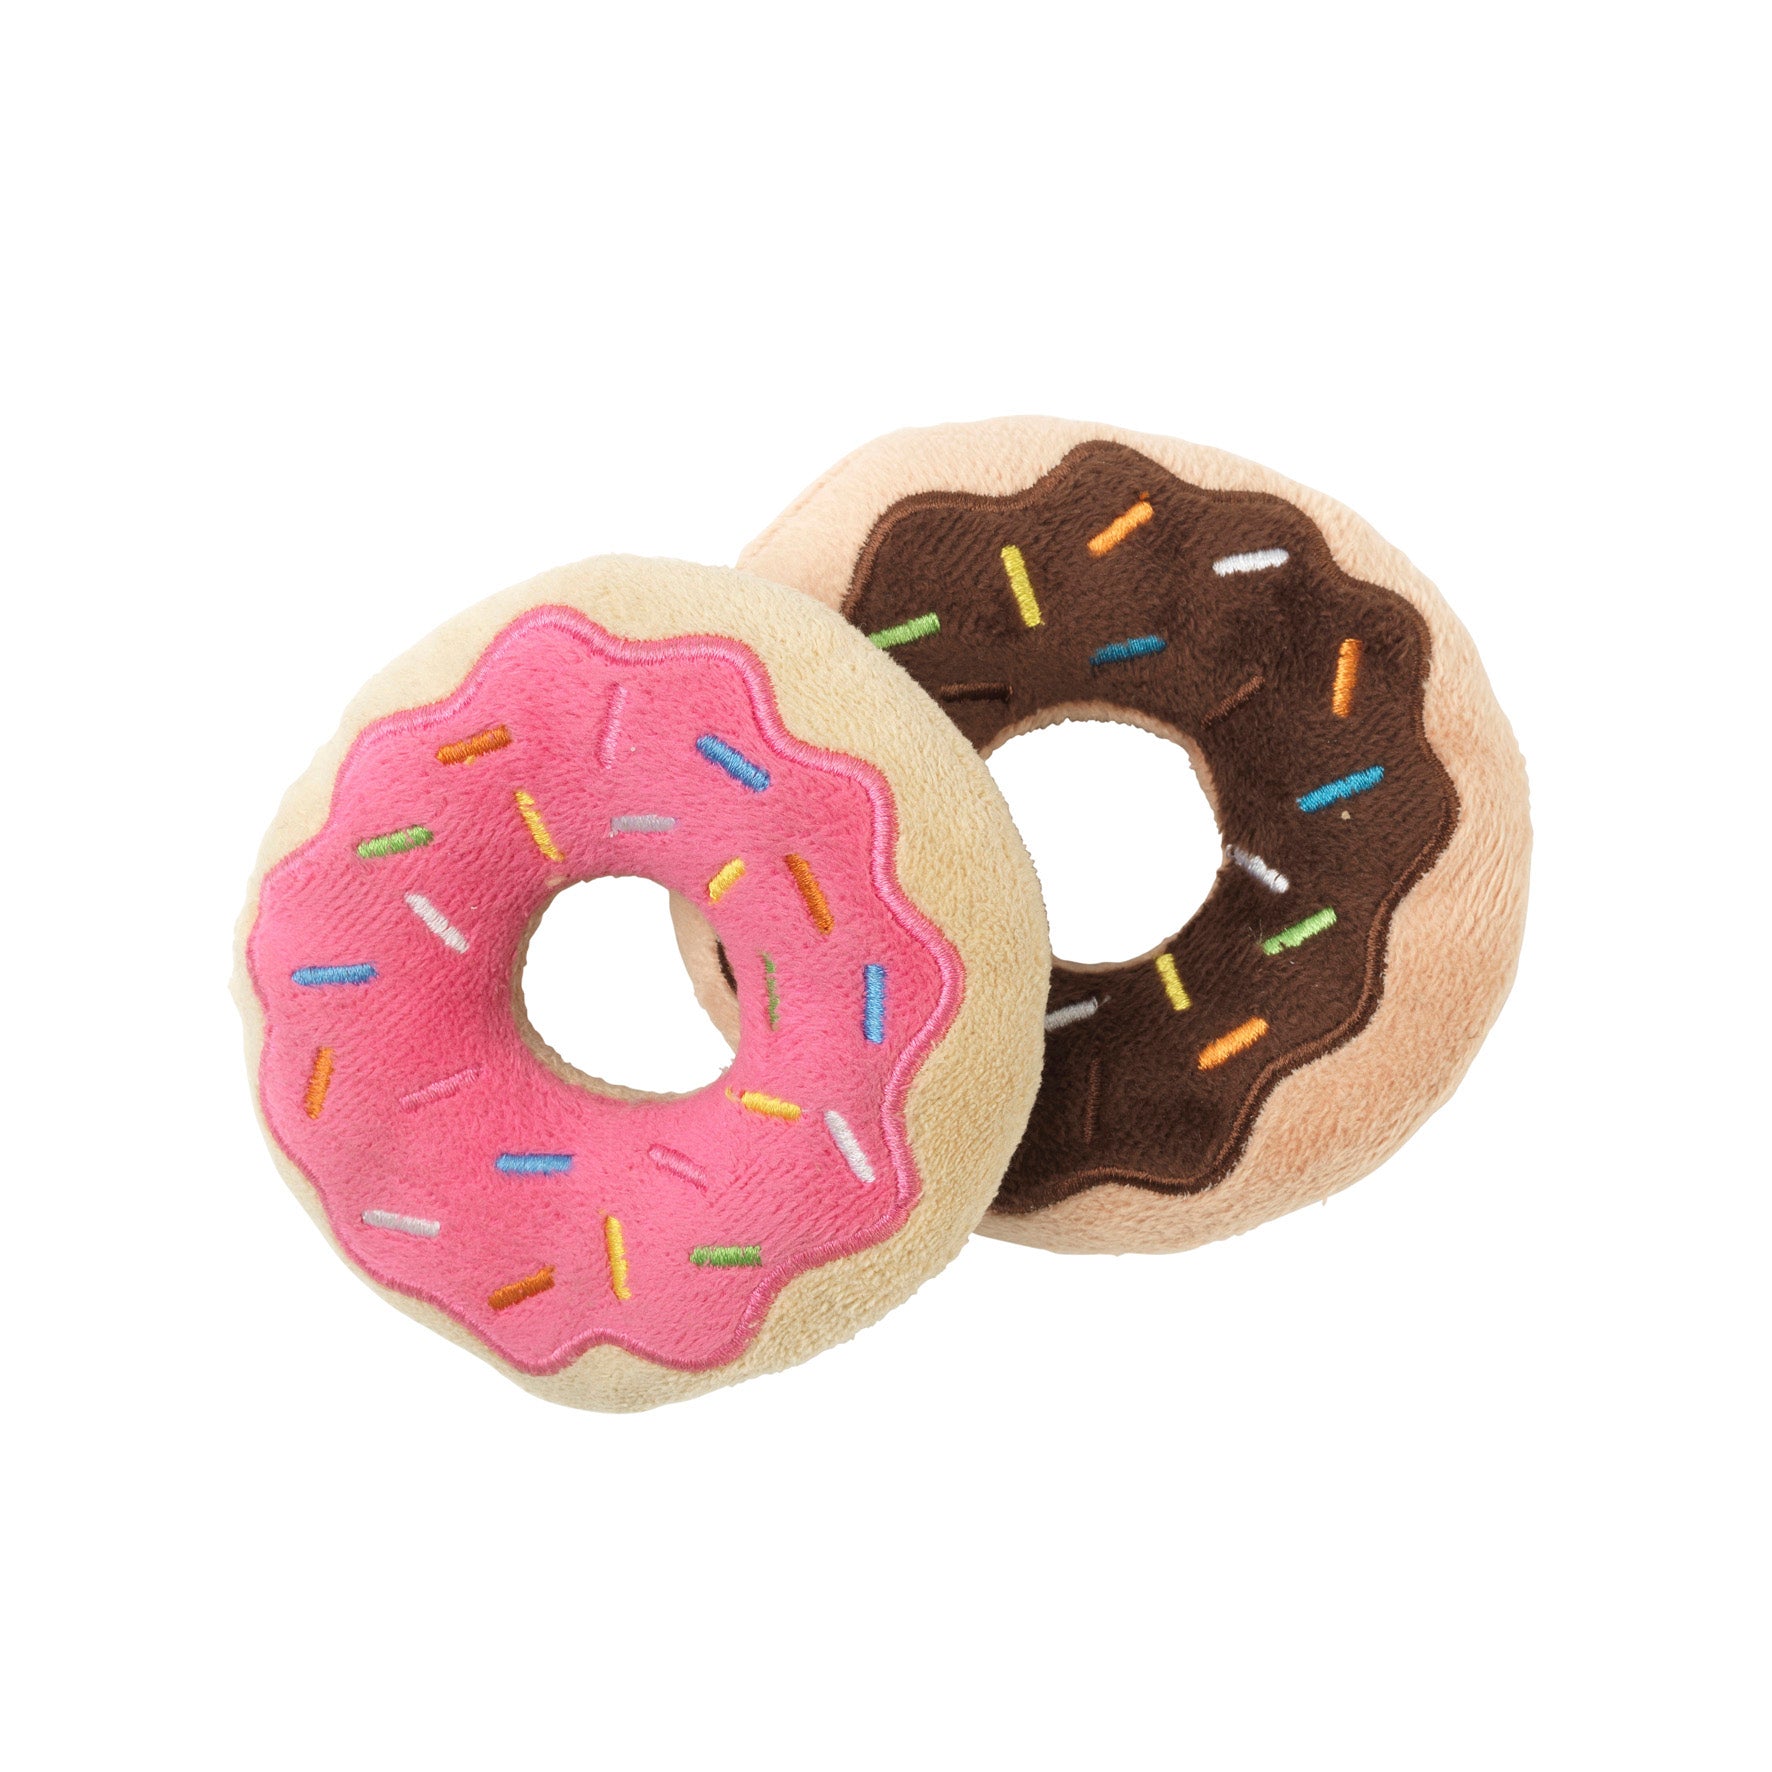 Donuts - 2 pack